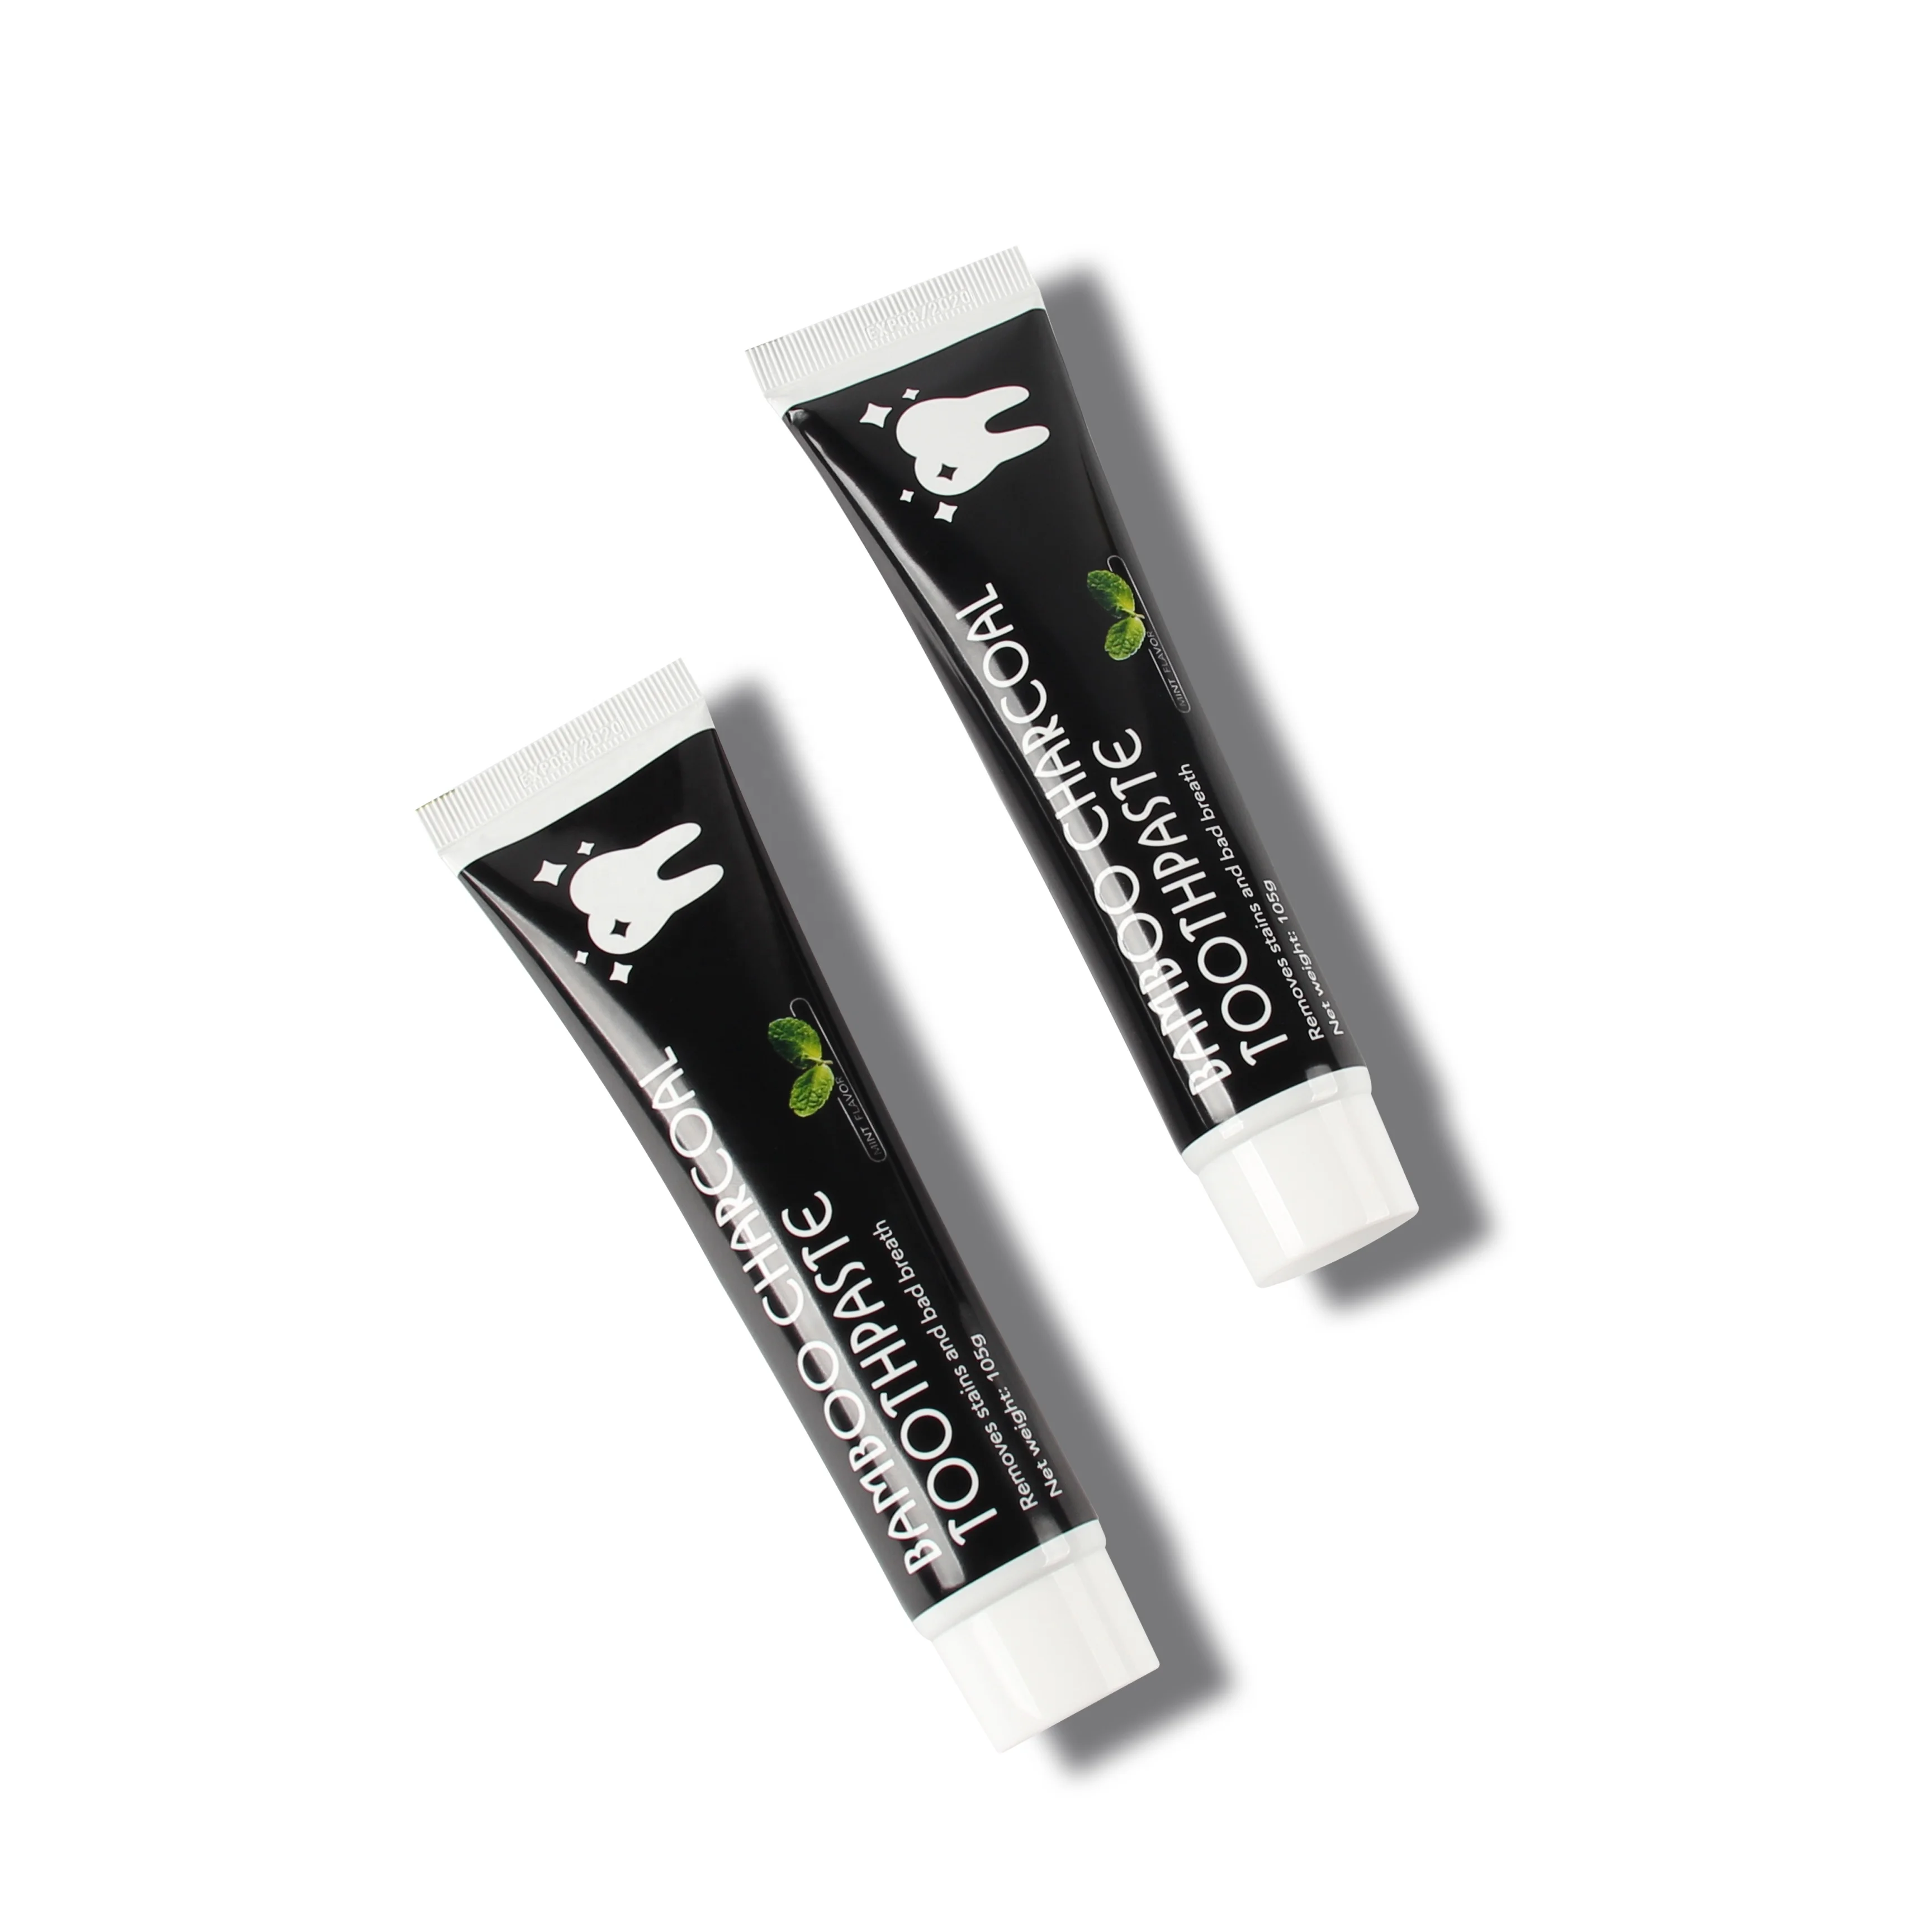 

2021 Hot Sale 100% Natural Teeth Whitening Toothpaste Wholesale Fluoride Free Activated Bamboo Charcoal Toothpaste Private Label